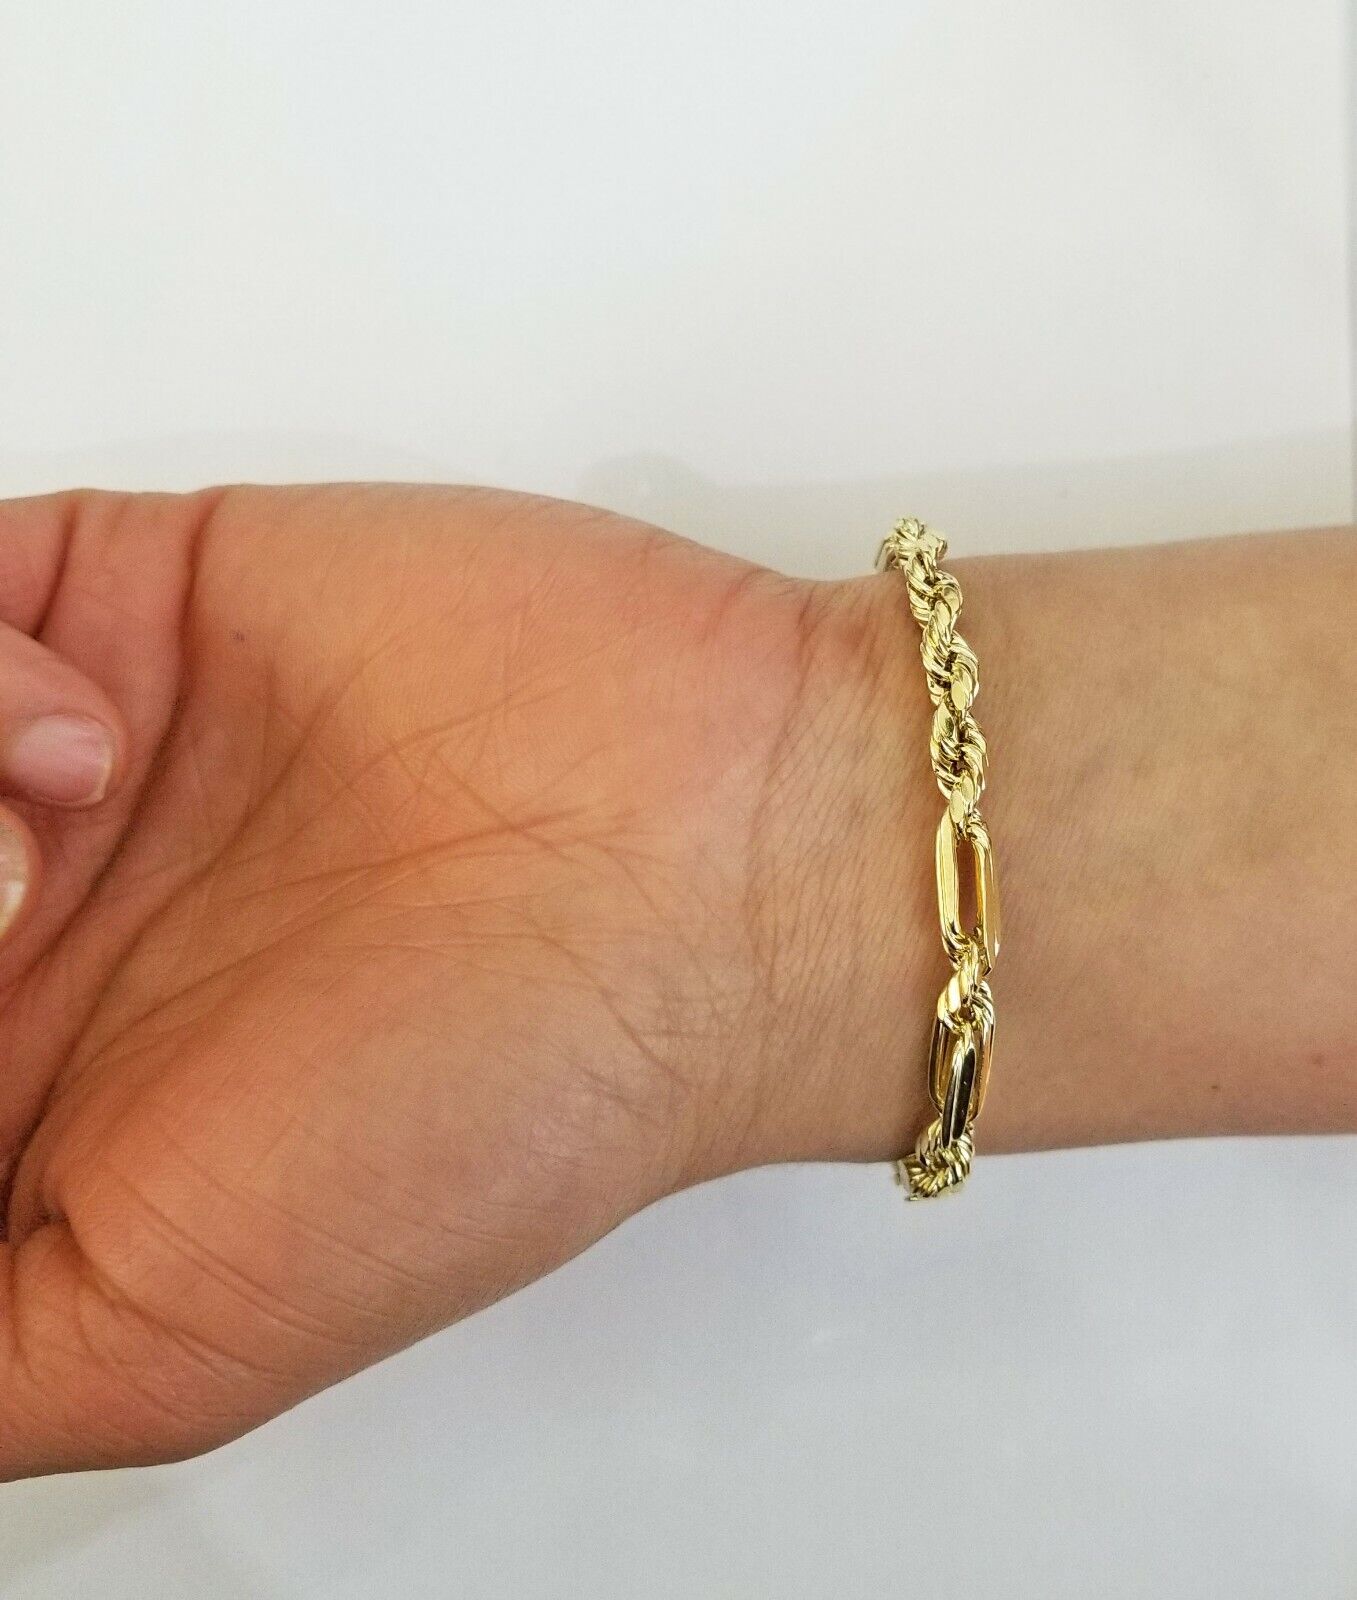 10k Yellow Gold Milano Rope Chain bracelet 8.5" 5mm real gold hand chain